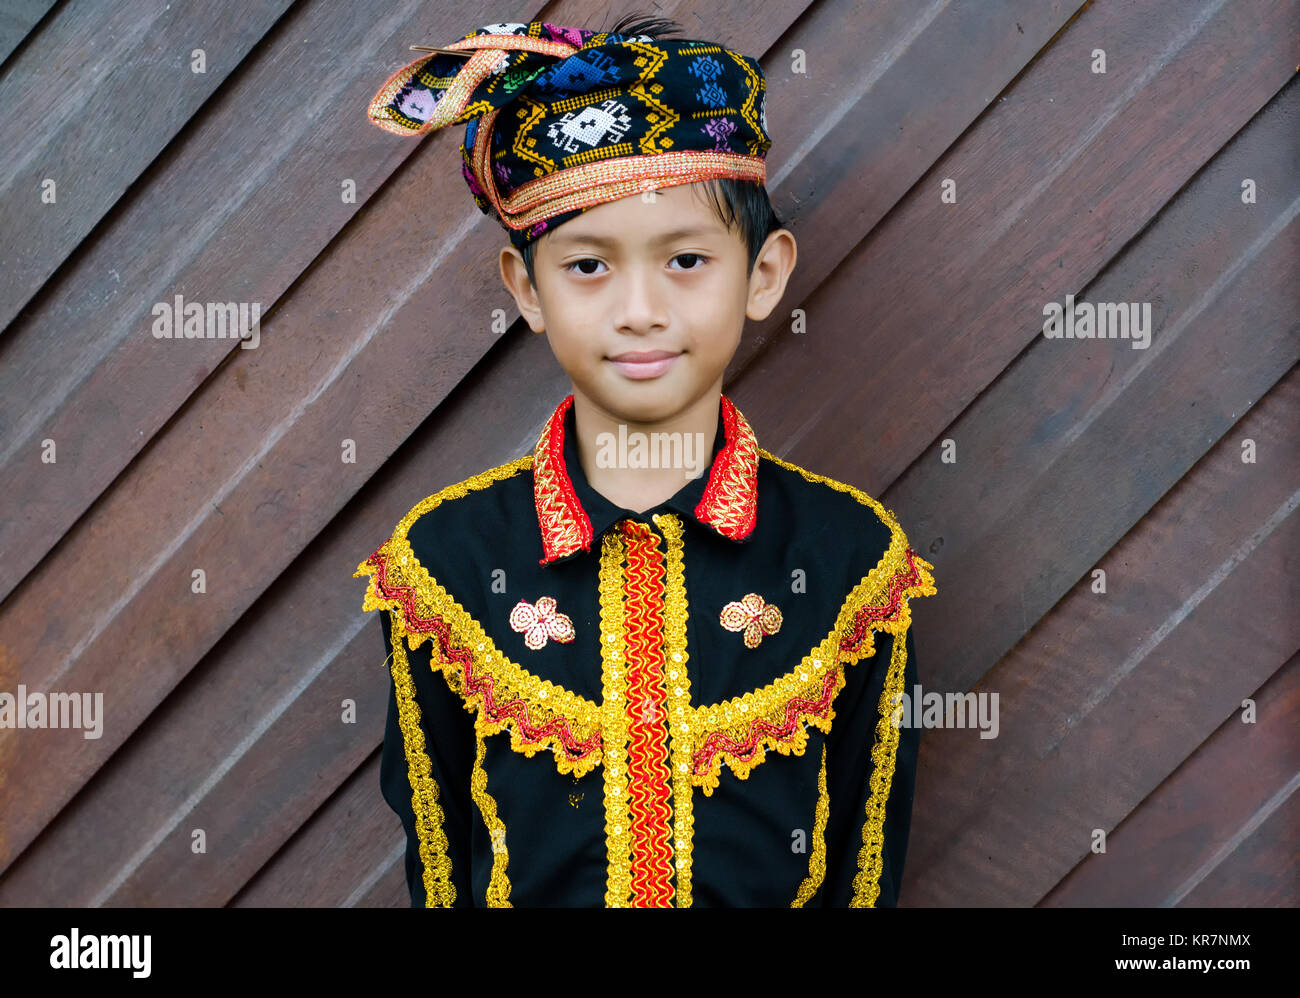 Tuaran Kota Kinabalu, Malaysia - December 02, 2017: Young boy From Indigenous people of Sabah Borneo in East Malaysia in traditional attire during Mus Stock Photo